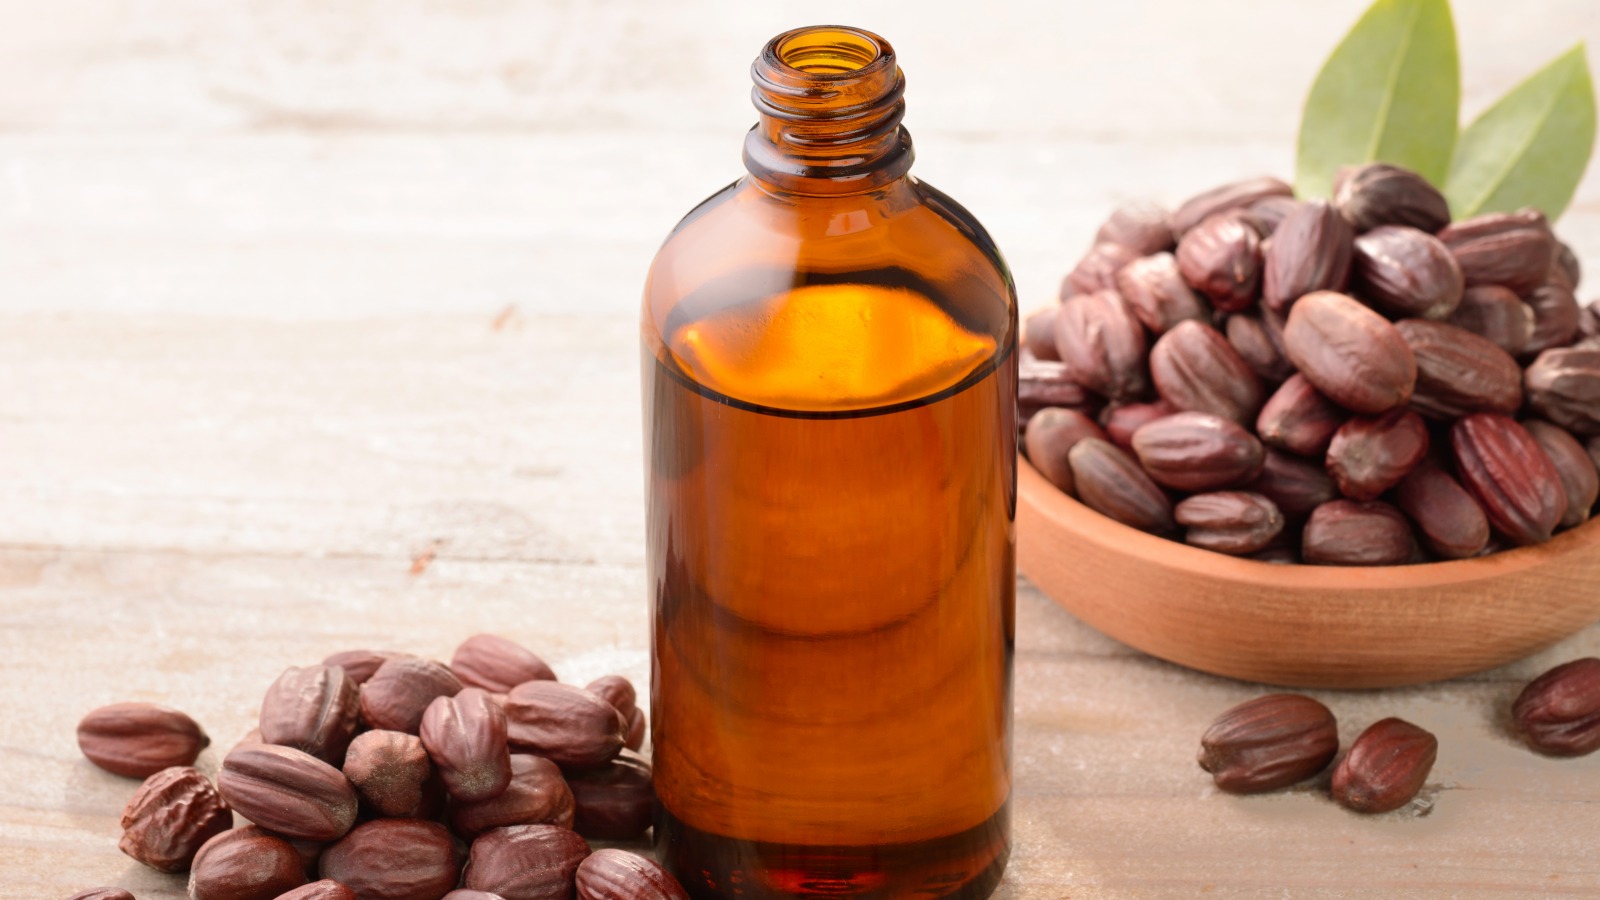 Why Jojoba Oil Should Be Part Of Your Beauty Routine